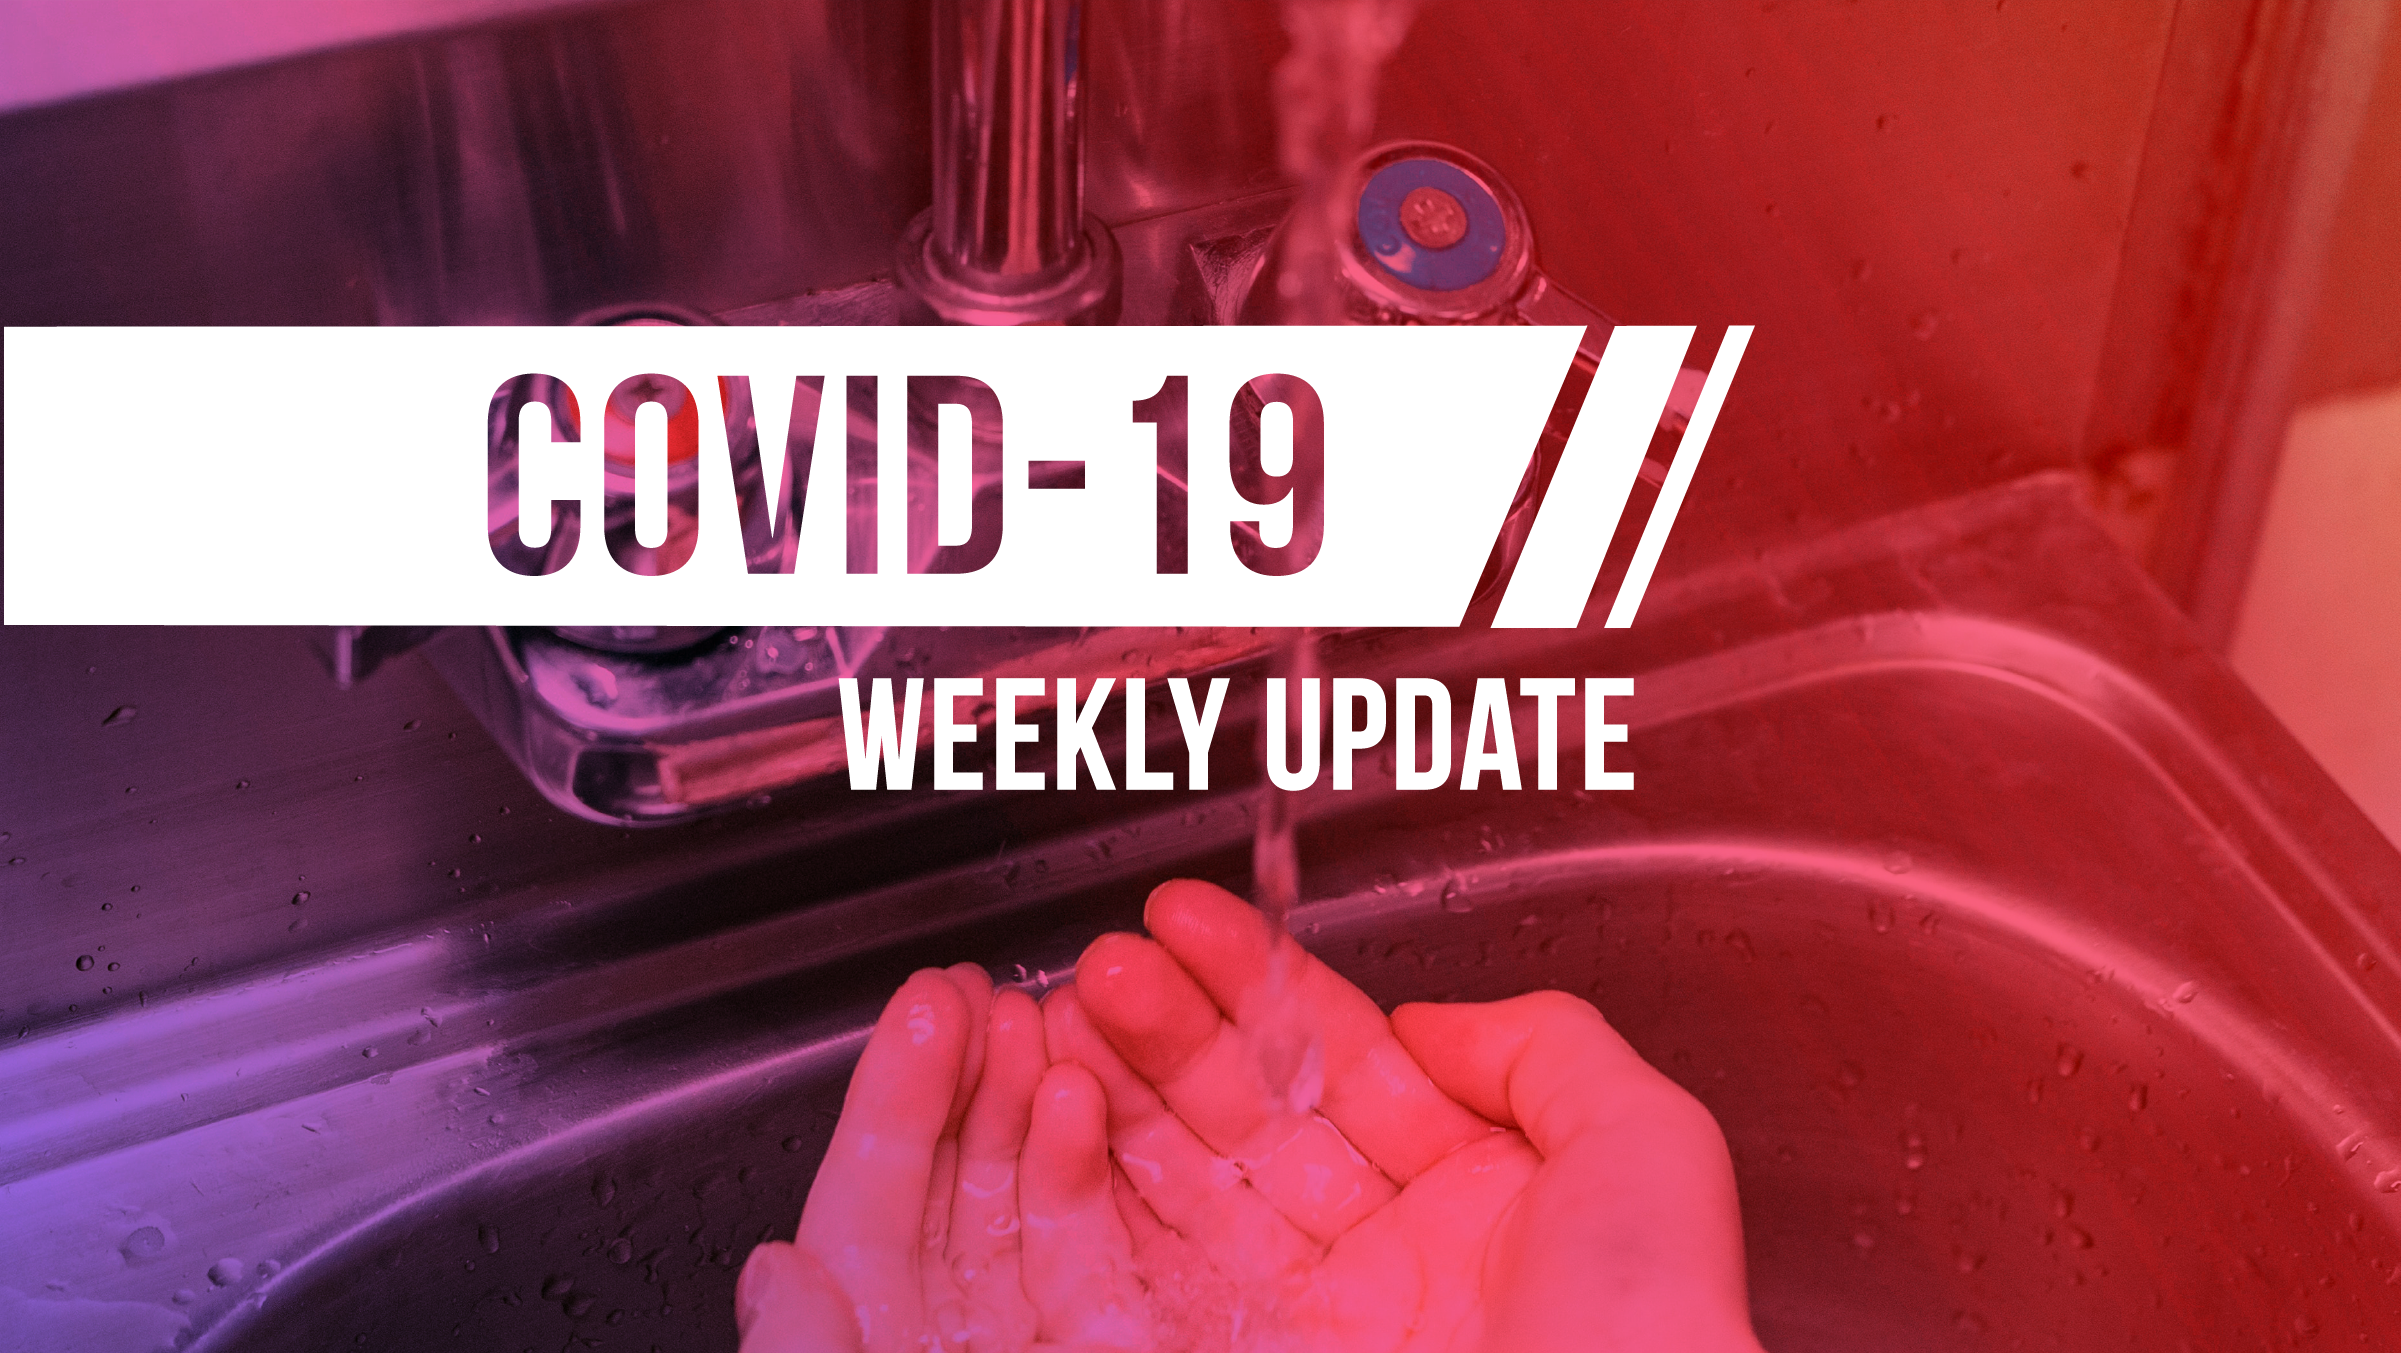 Image of hands washing in a sink, with words "COVID-19 Weekly Update."